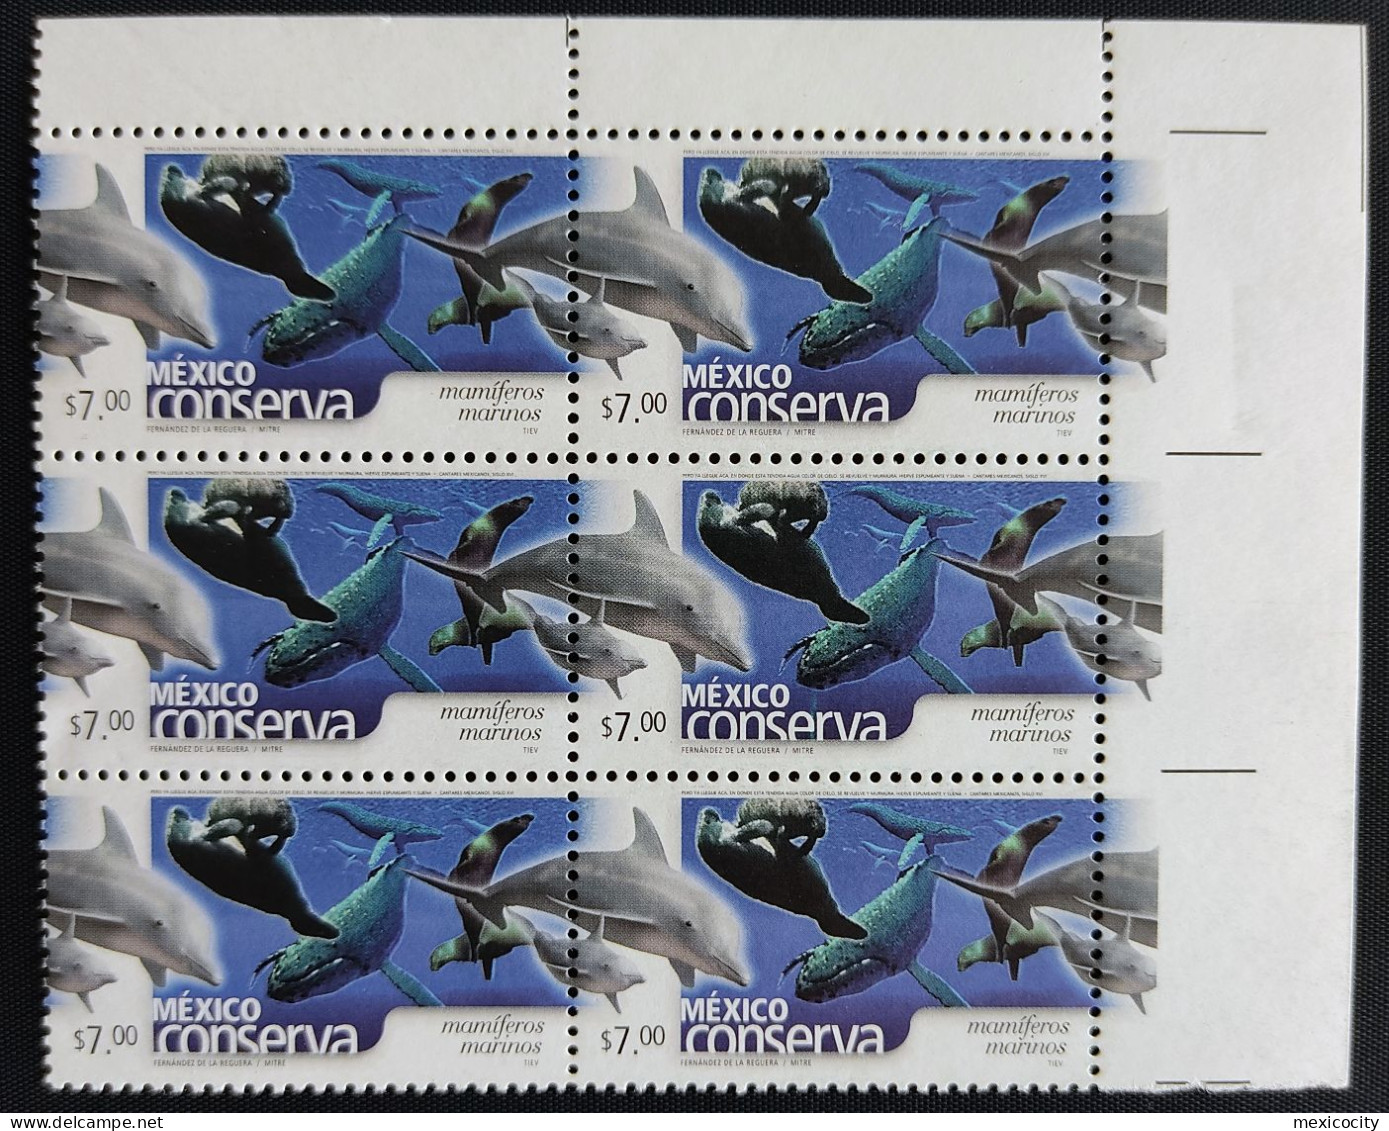 MEXICO 2005 $7 SEA MAMMALS Blk. 6, One With Blue Line Below Whale Flaw, Rare Ptg. Var. MNH Unm. - Mexique